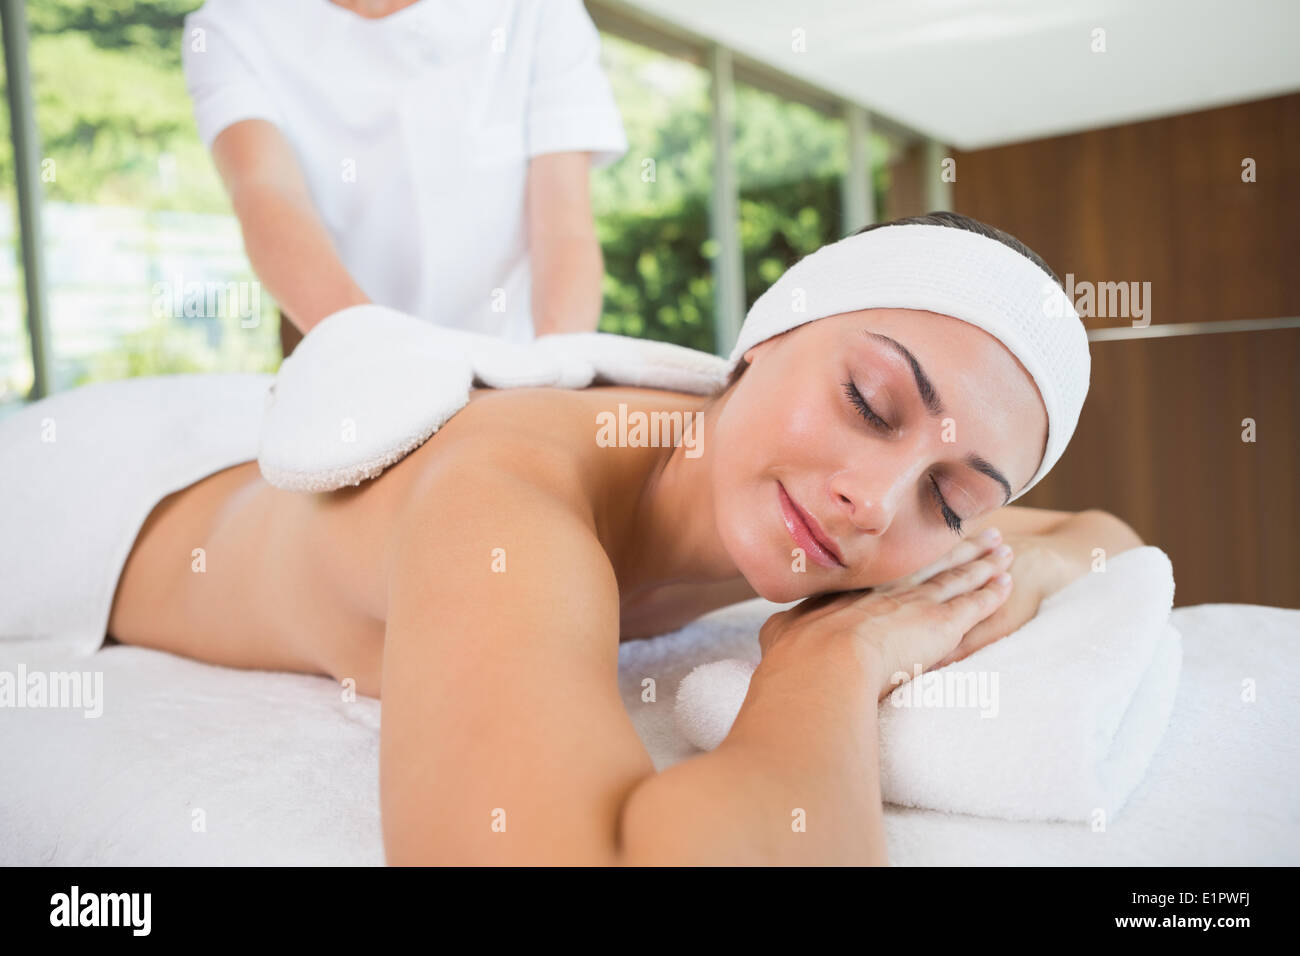 Beauty therapist rubbing smiling womans back with heated mitts Stock Photo